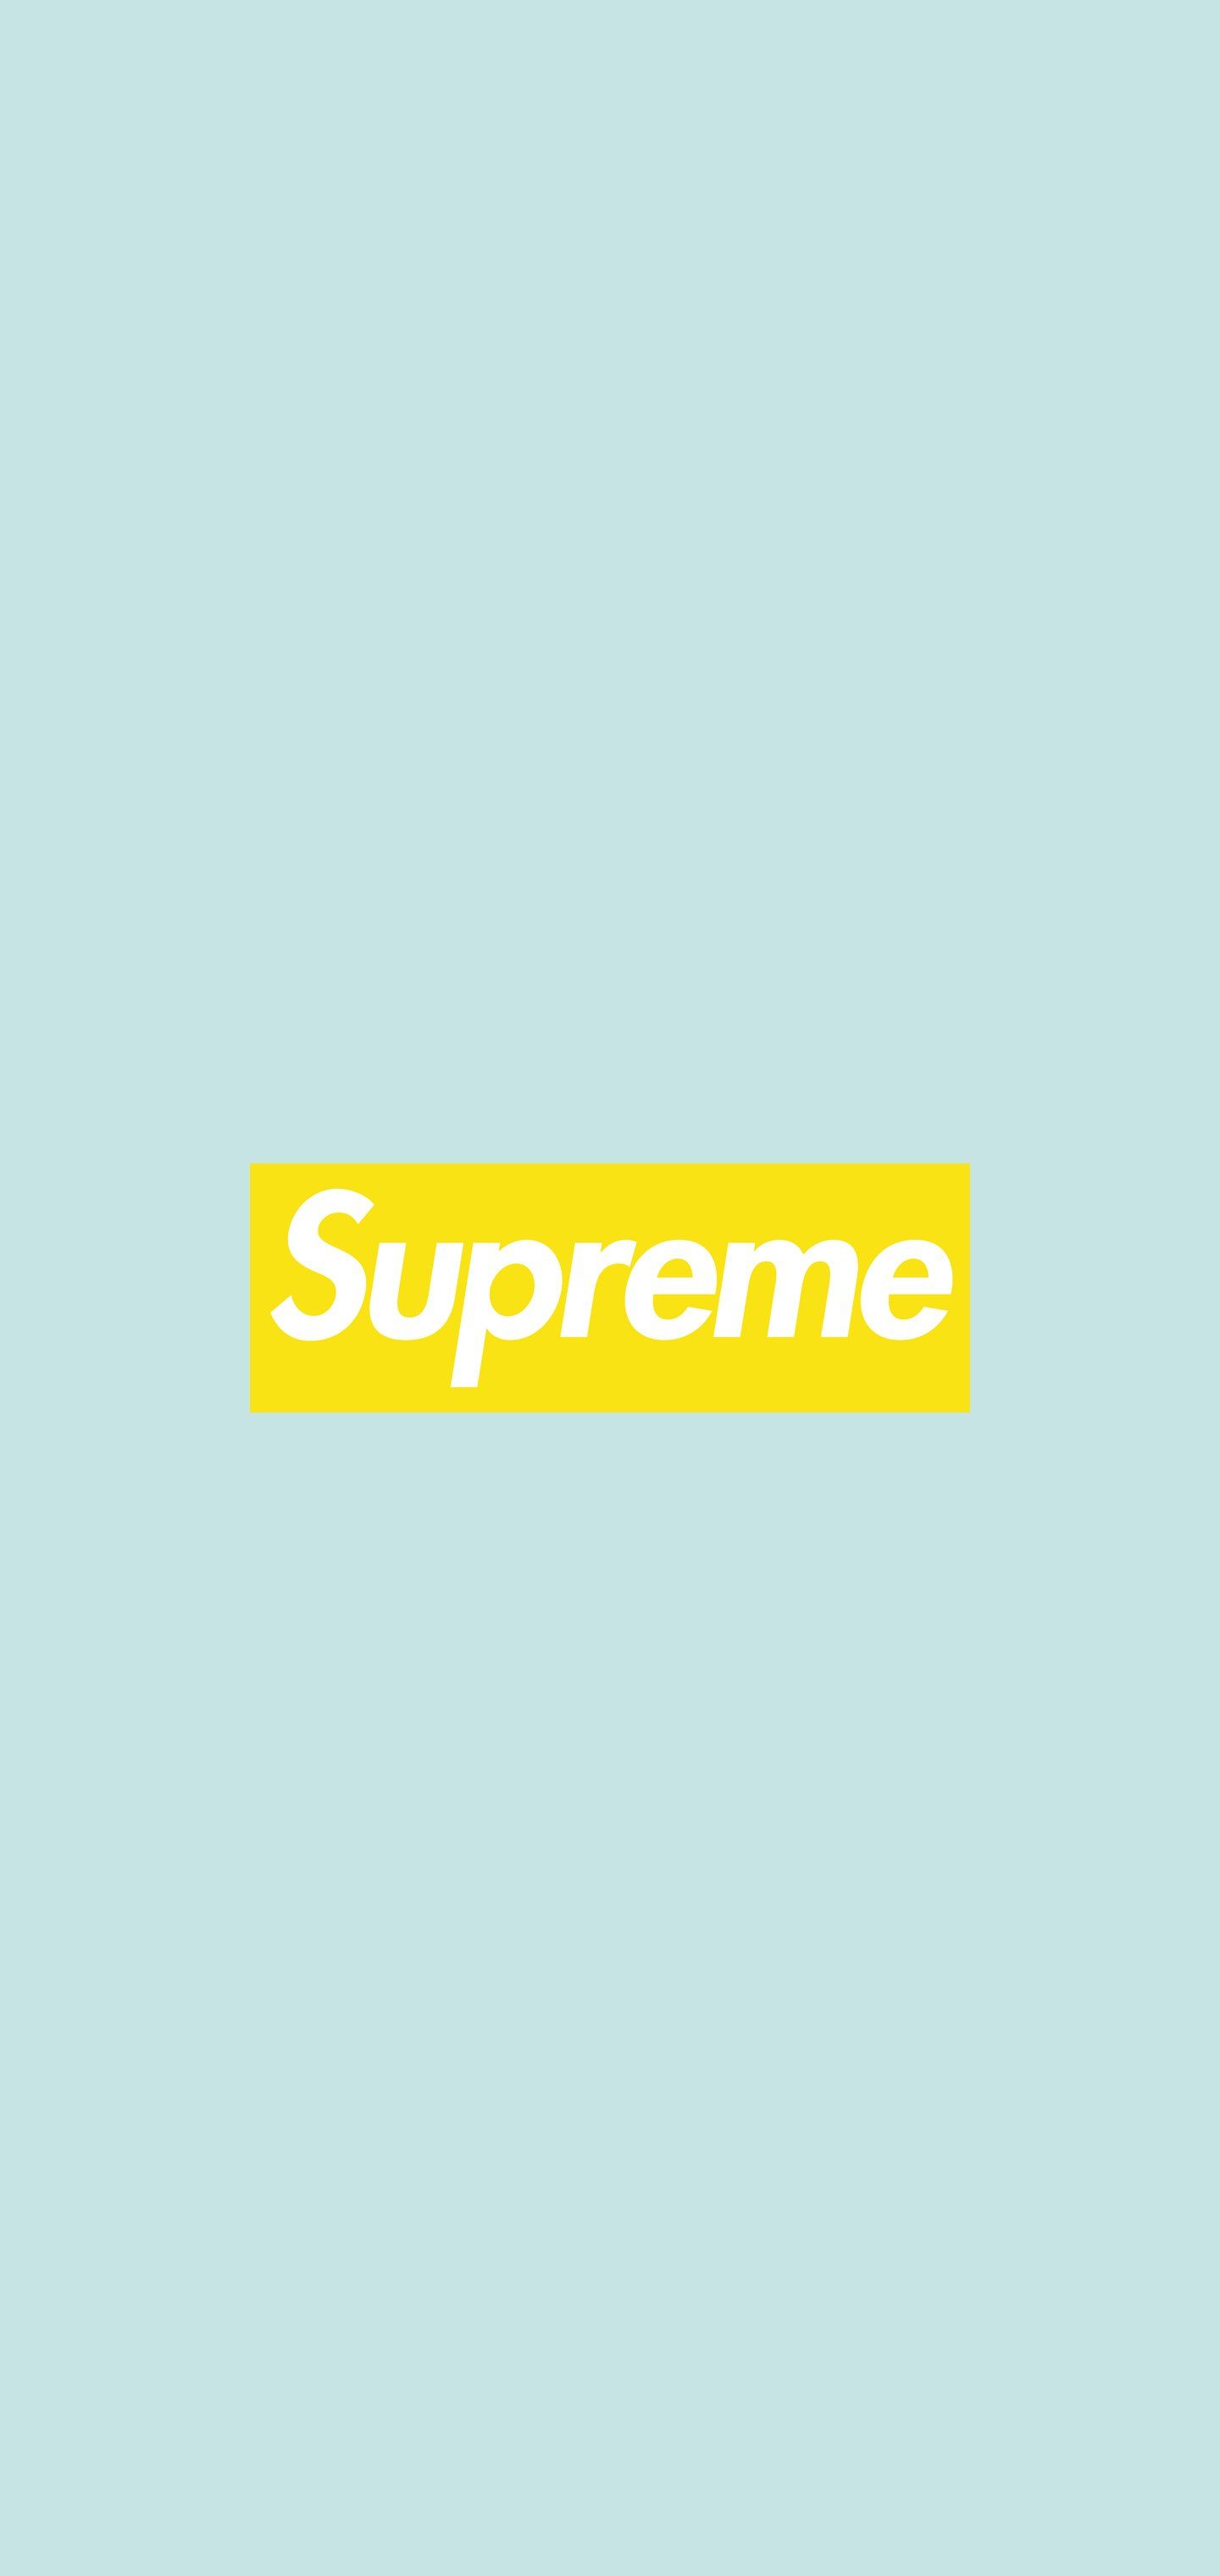 Question would anyone be interested in some Supreme bogo phone wallpaper?